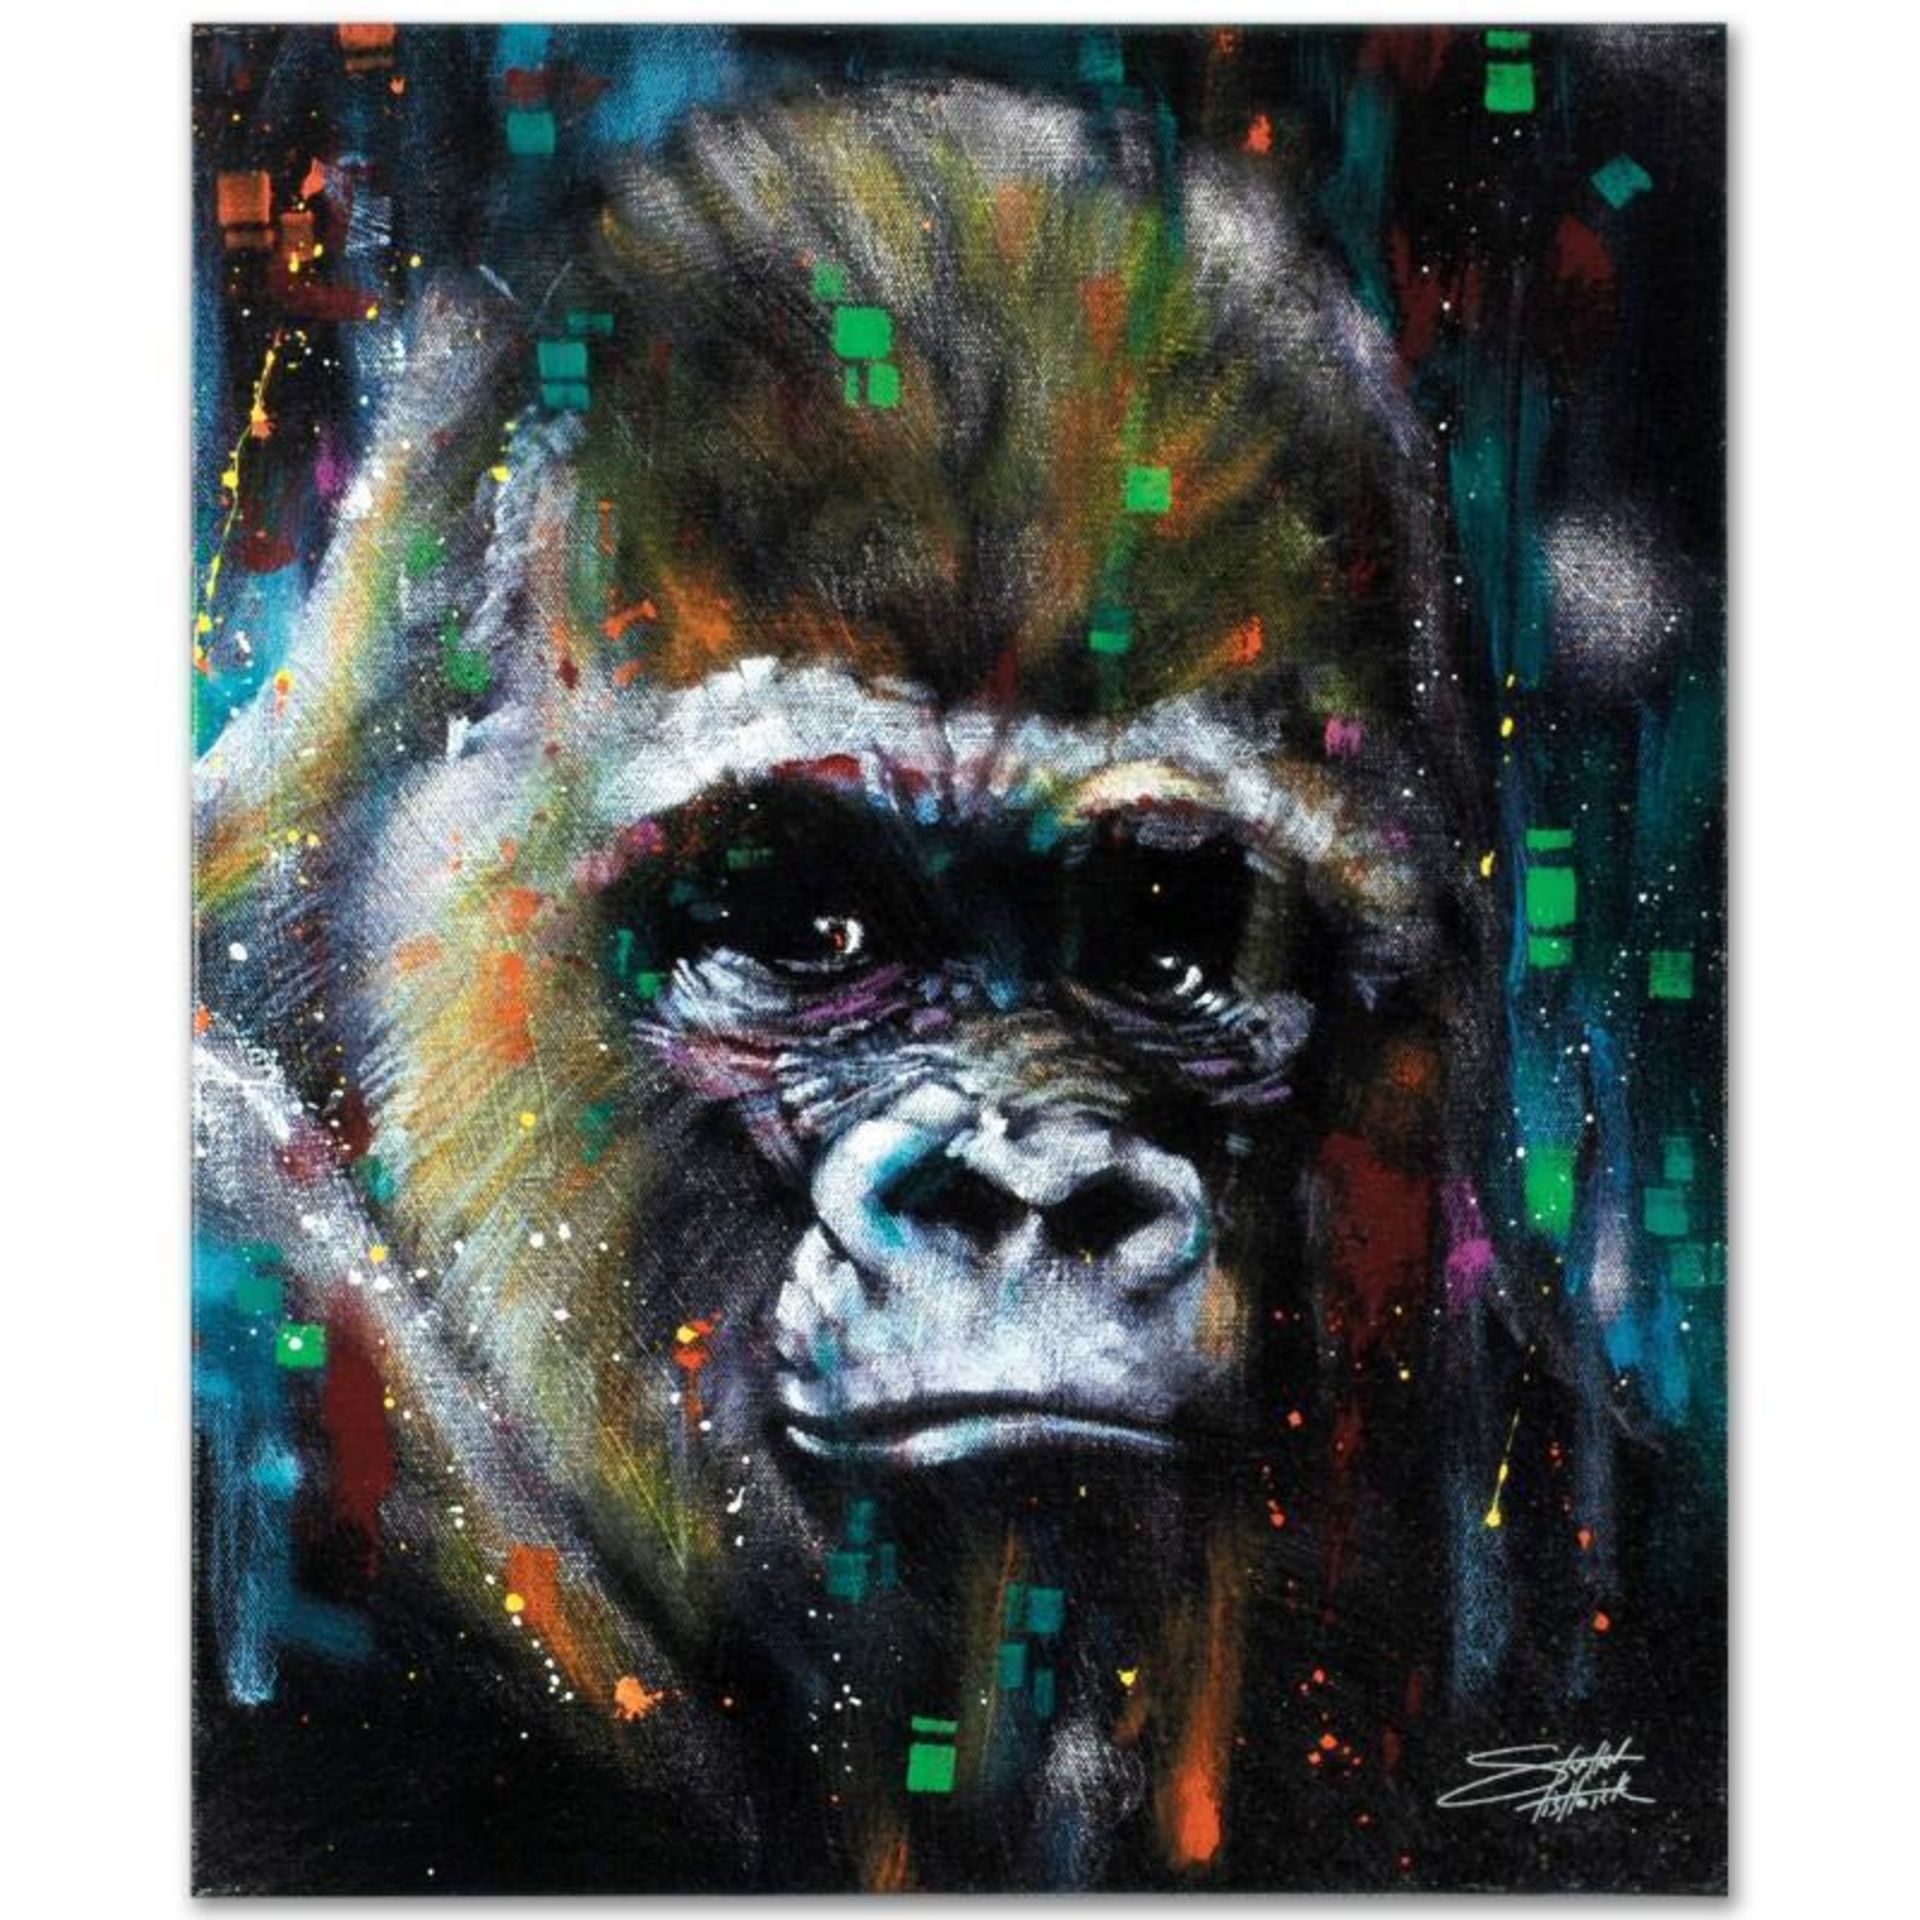 "Albert" Limited Edition Giclee on Canvas by Stephen Fishwick, Numbered and Sign